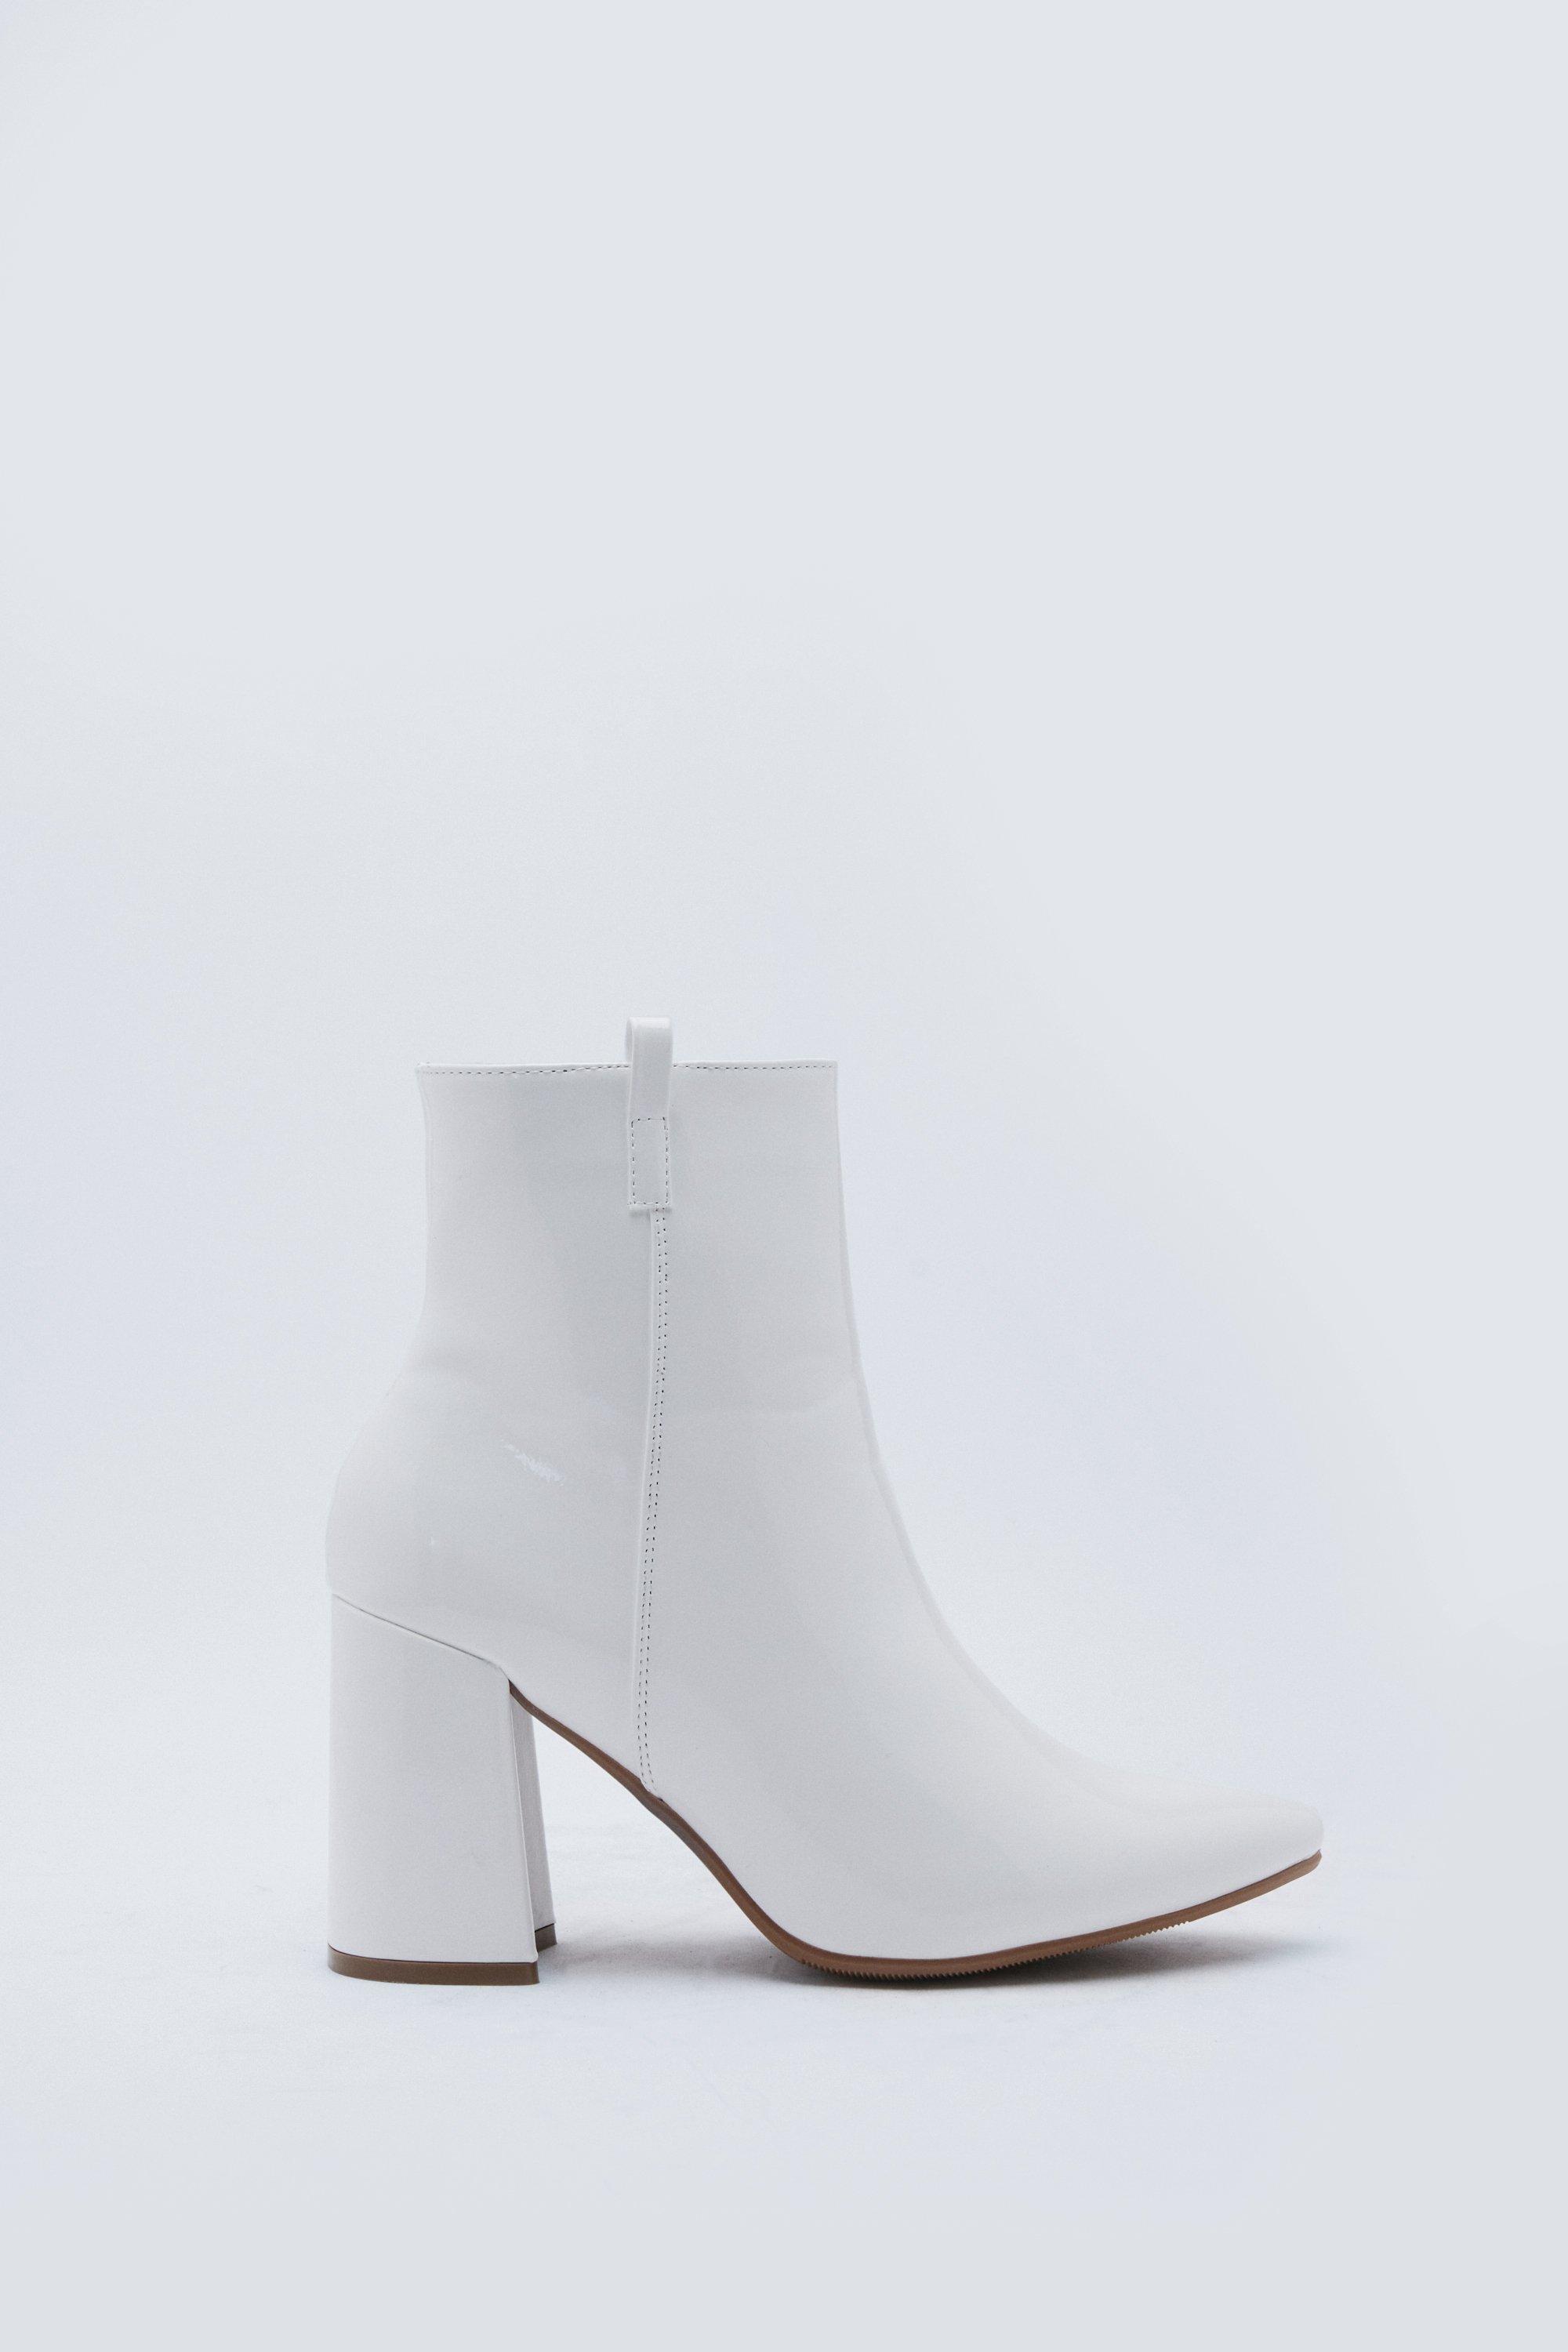 Your Love Shines On Patent Faux Leather Boots